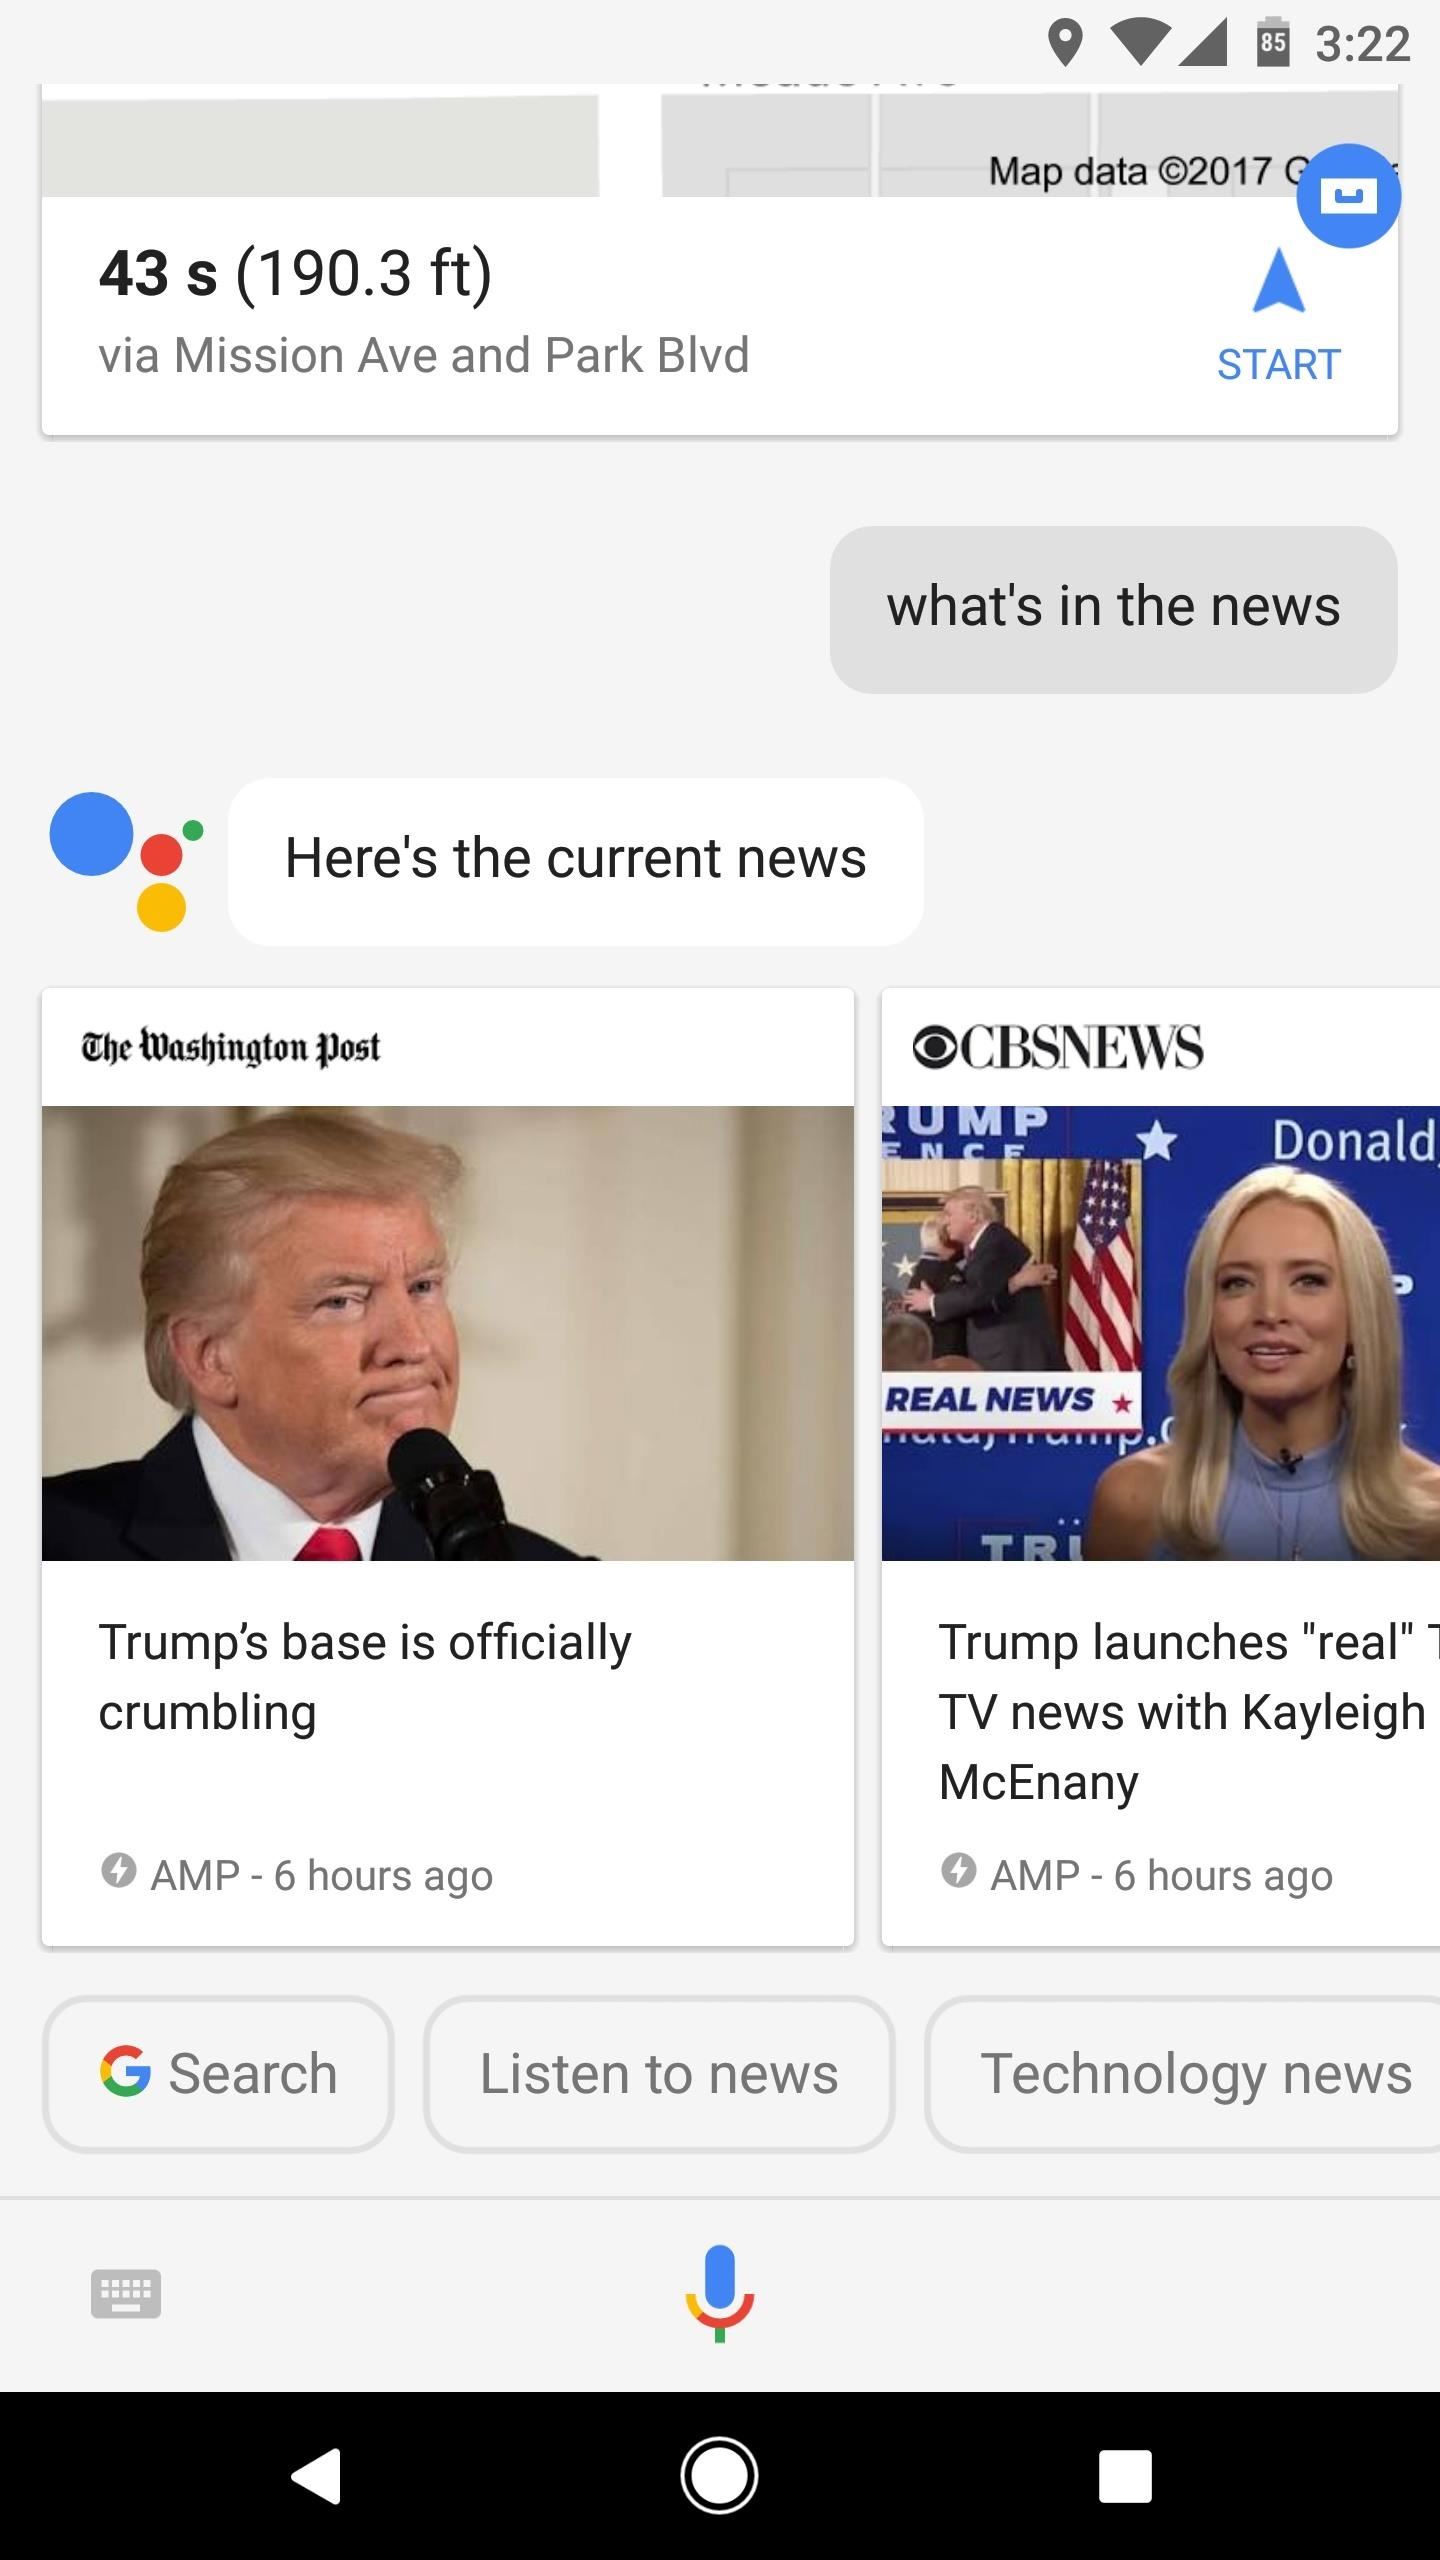 Google Assistant 101: How to Customize Your News Feed & 'My Day' Experience